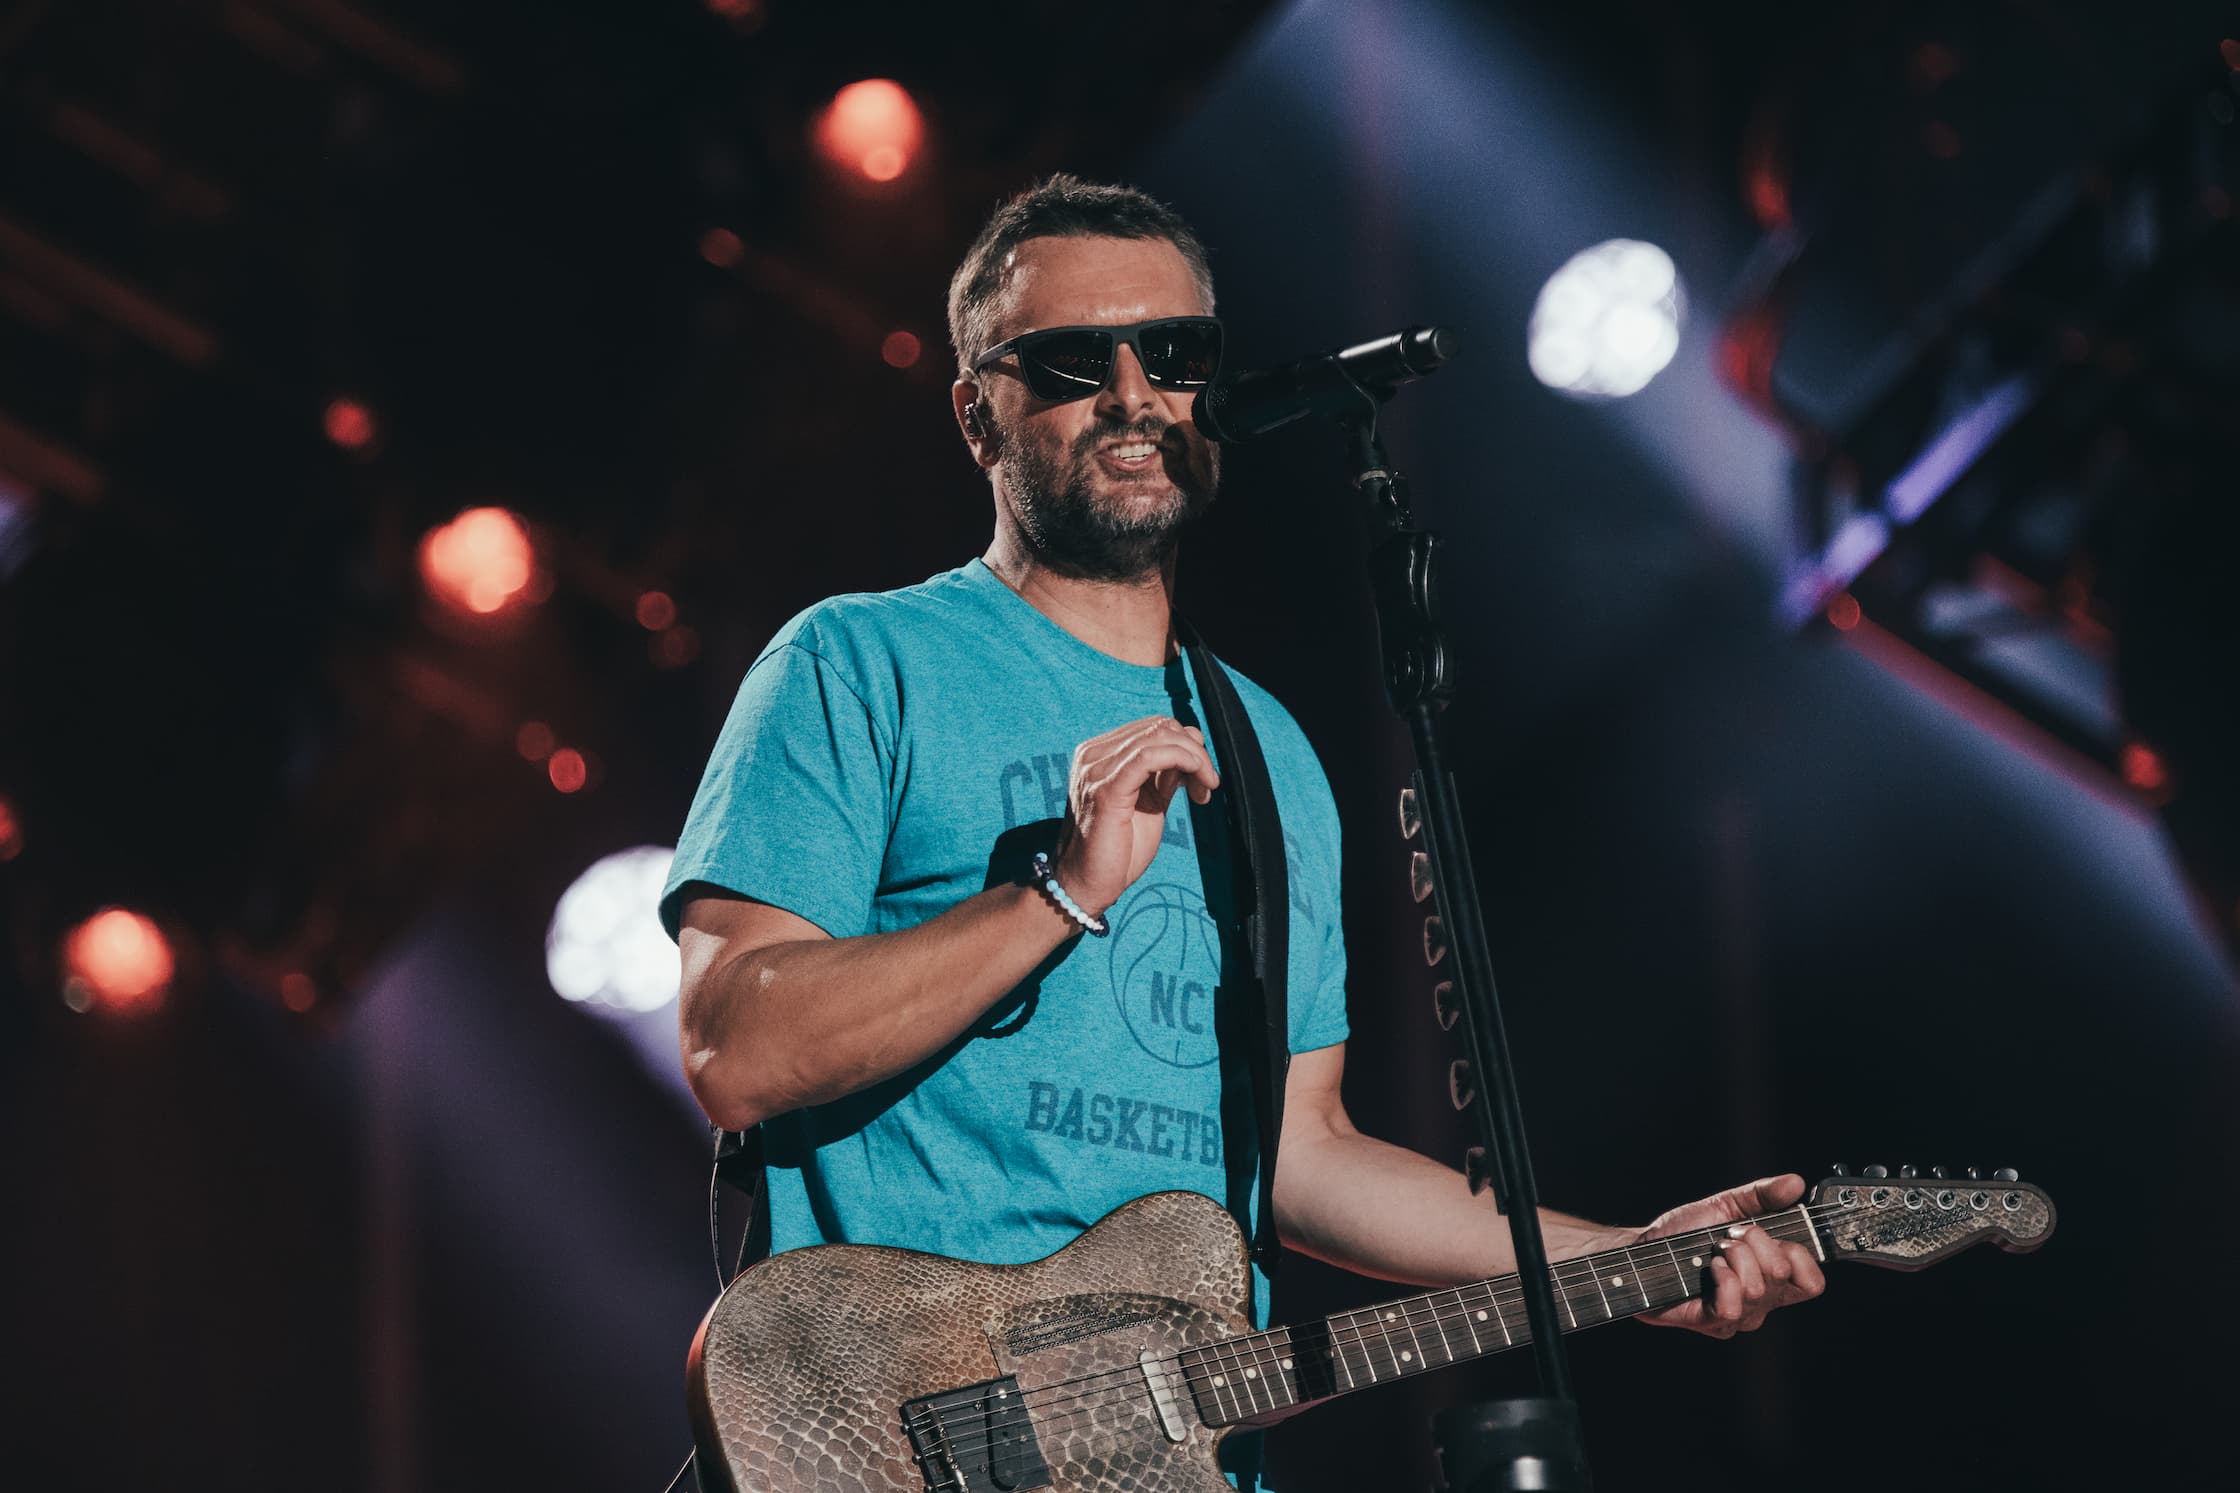 Eric Church at CMA Fest 2023 by Laura Ord